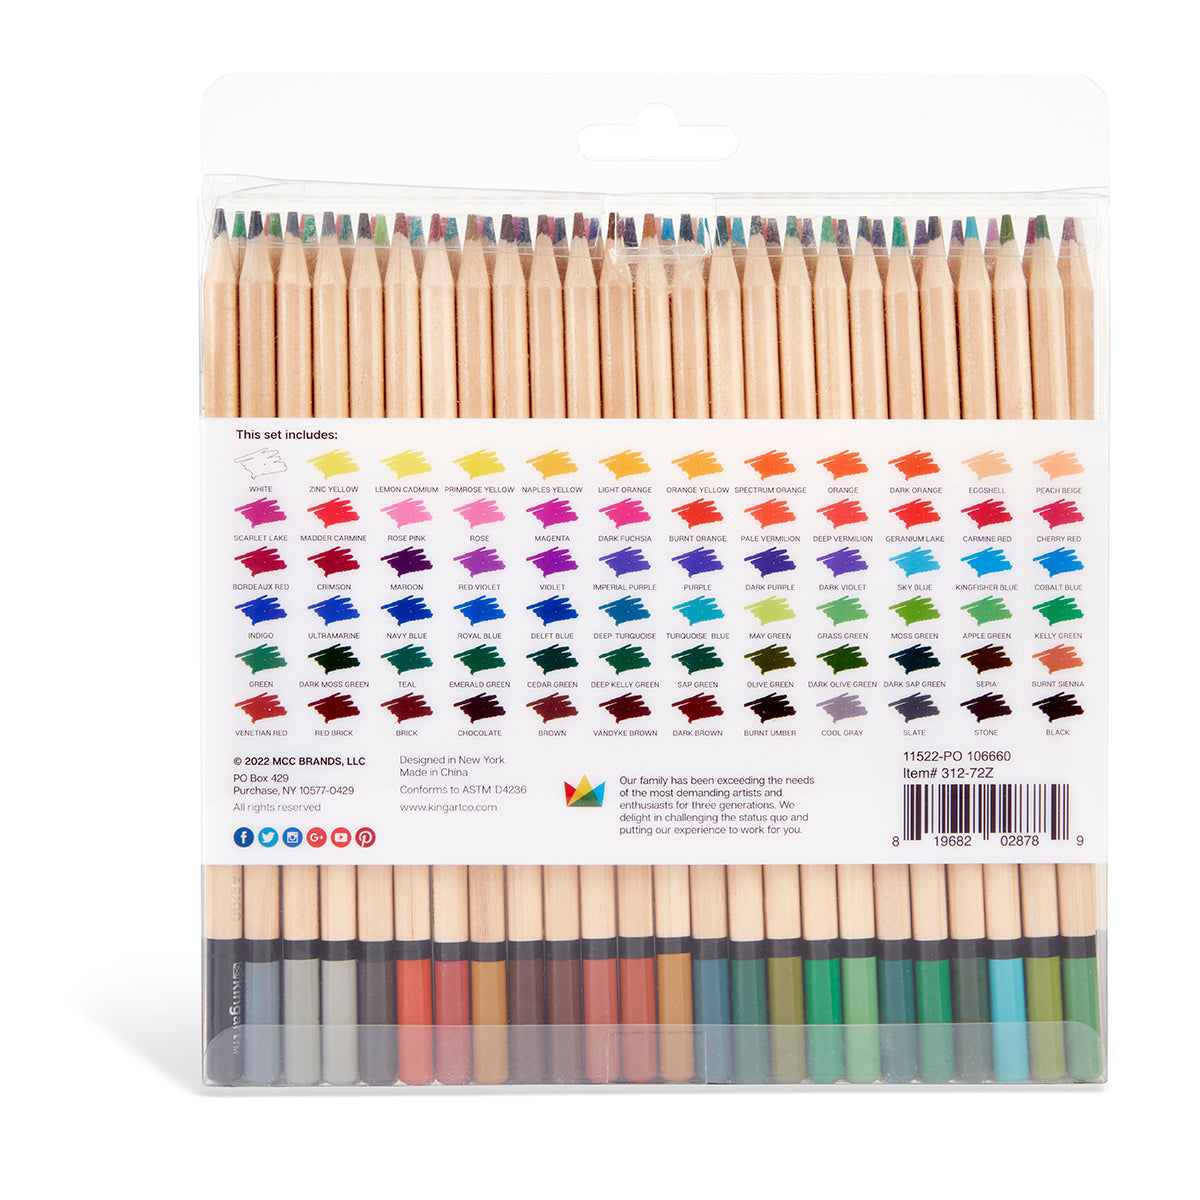 72 ct. Colored Pencils - Variety Color Pencils Pack